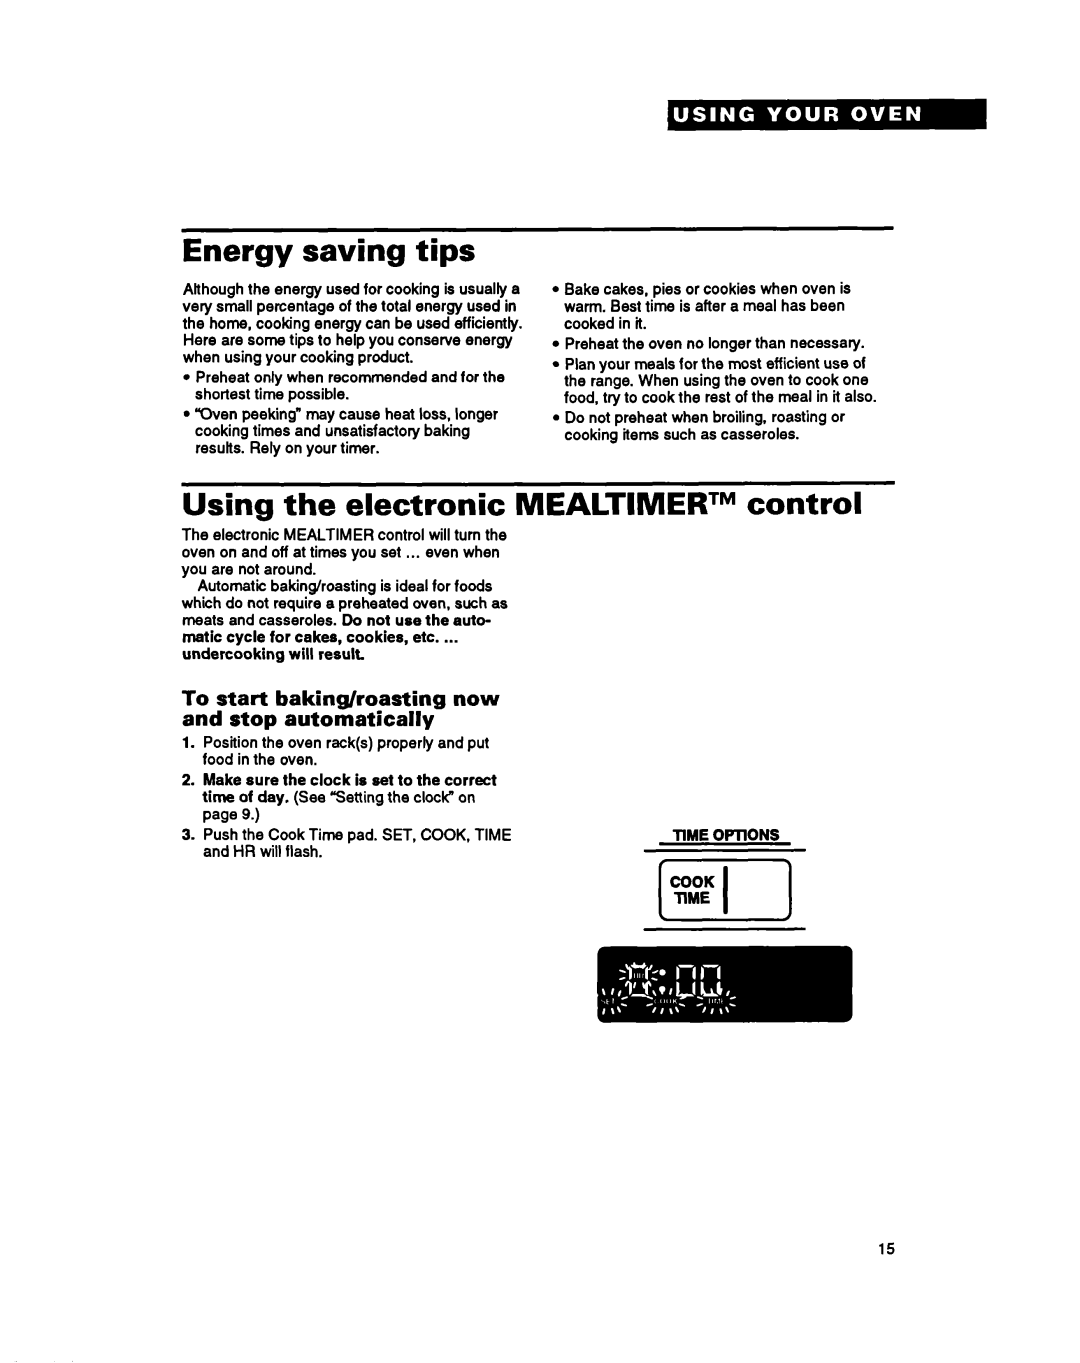 Whirlpool RB262PXY warranty Energy saving tips, Using the electronic MEALTIMERTM control, undercooking will result 